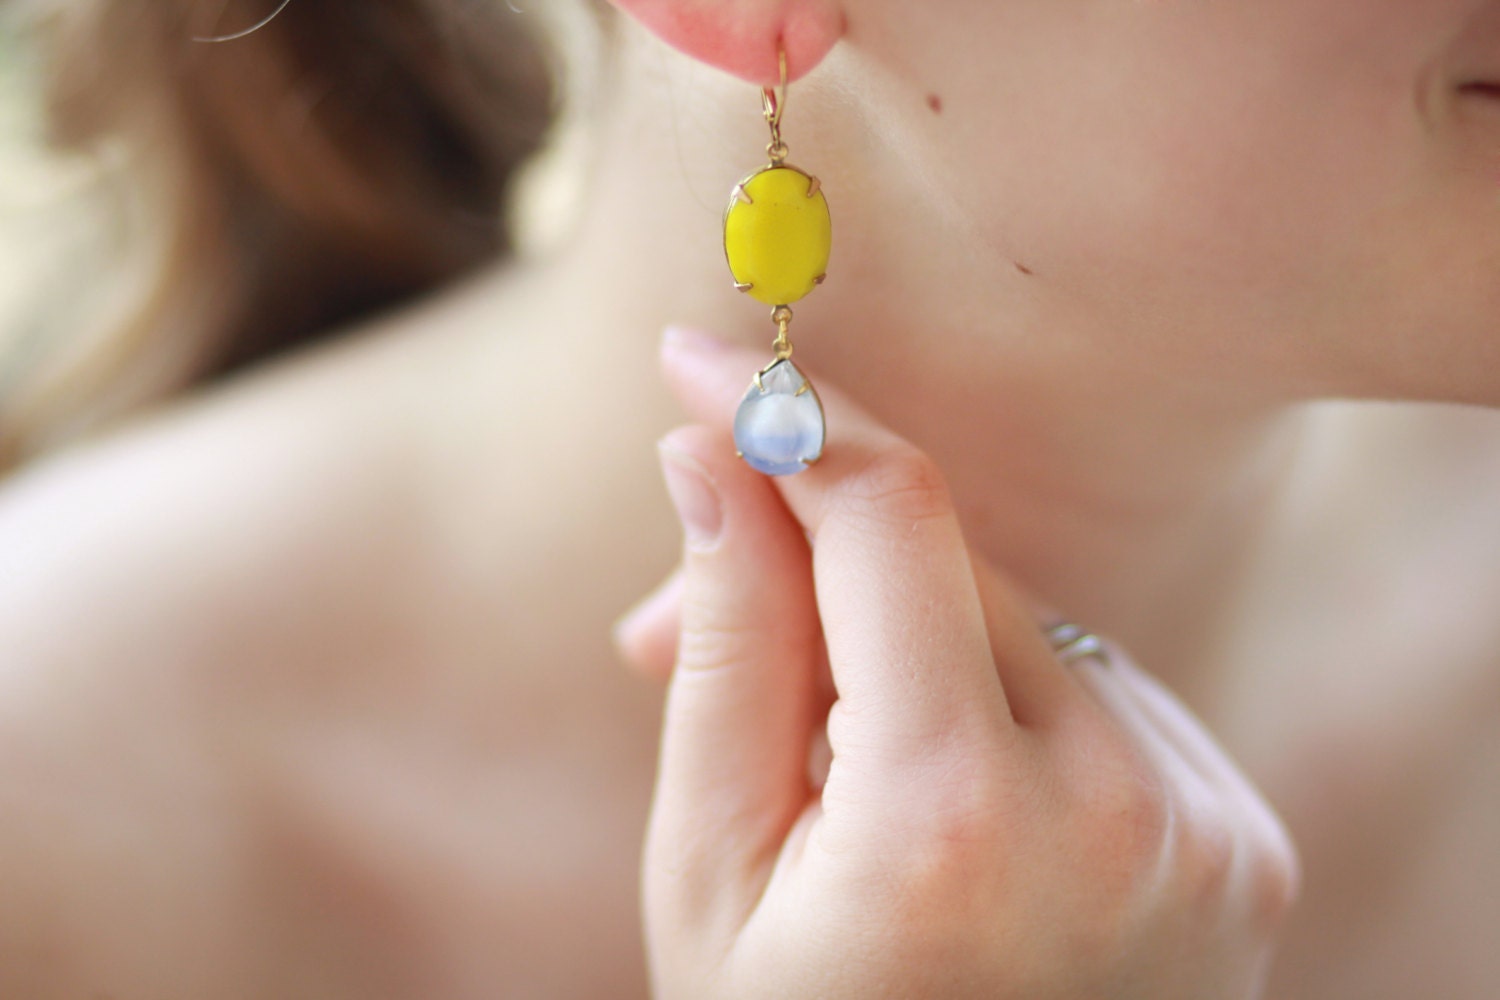 Sunny Blue Skies Earrings - Sky Blue and Opaque Lemon Yellow Crystal Dangles - Gold Brass - Spring Wedding, Bridal - Vintage - Gift Box - MySelvagedLife